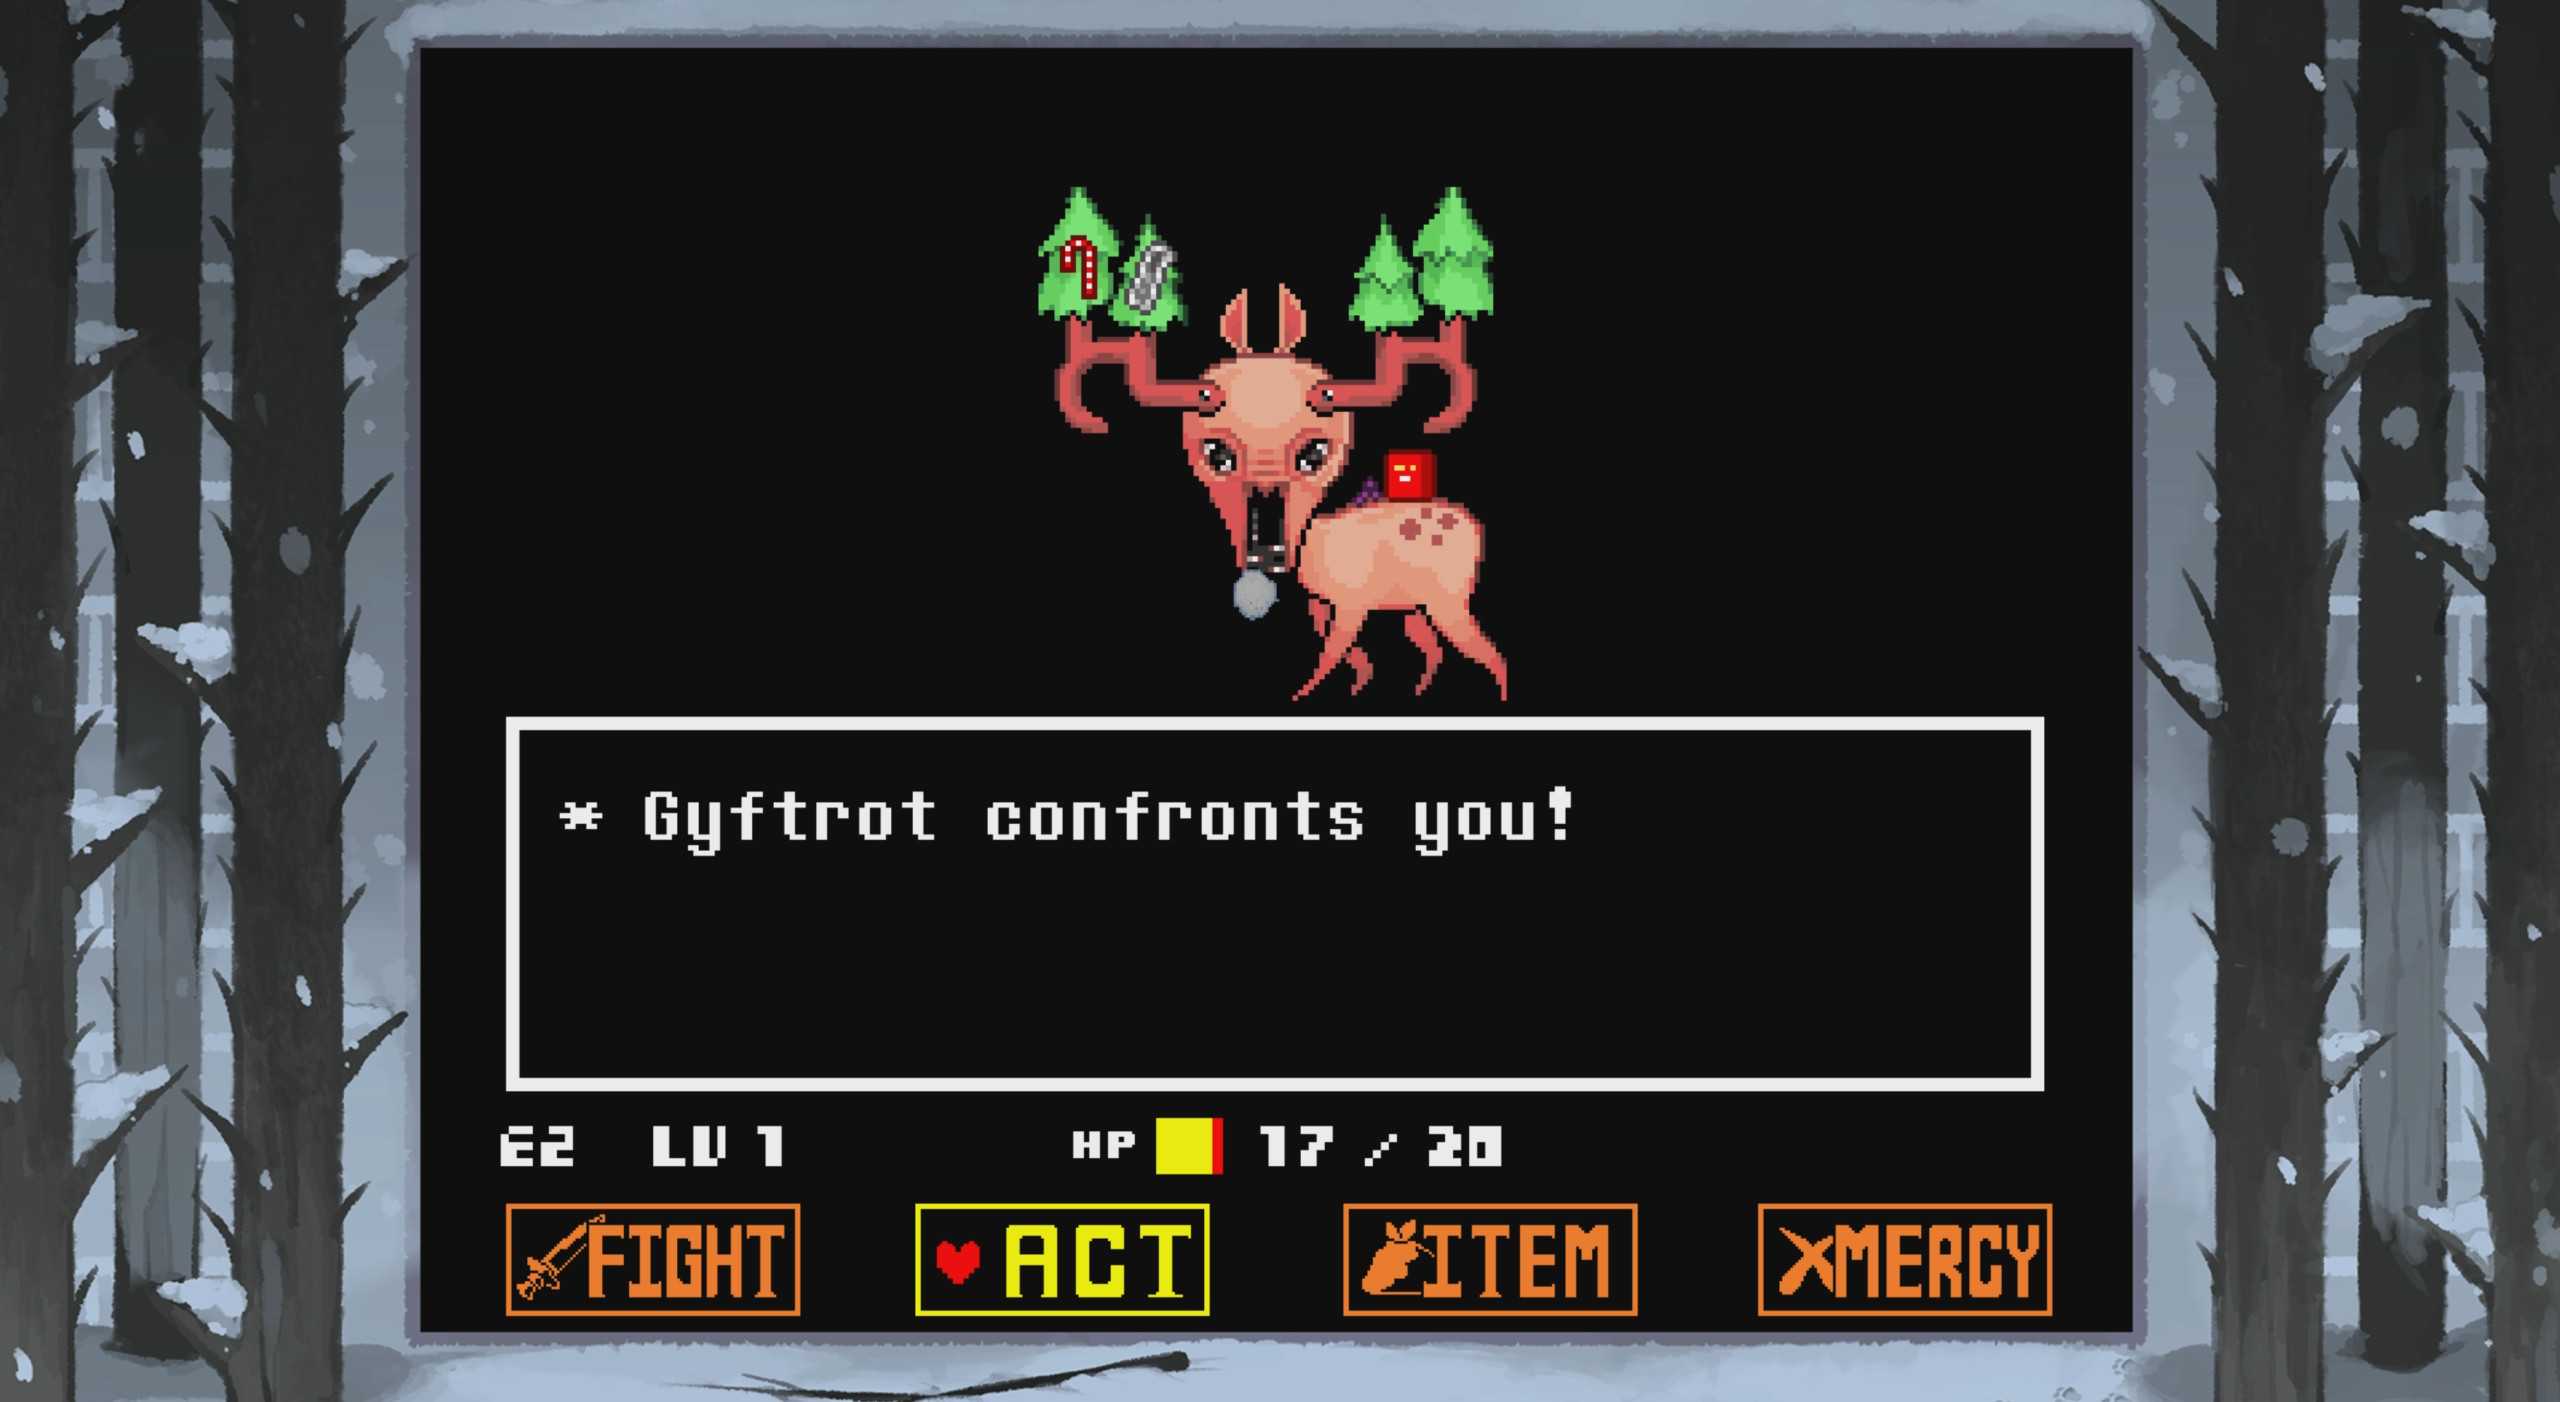 Undertale dialogue and interfaces - Fonts In Use